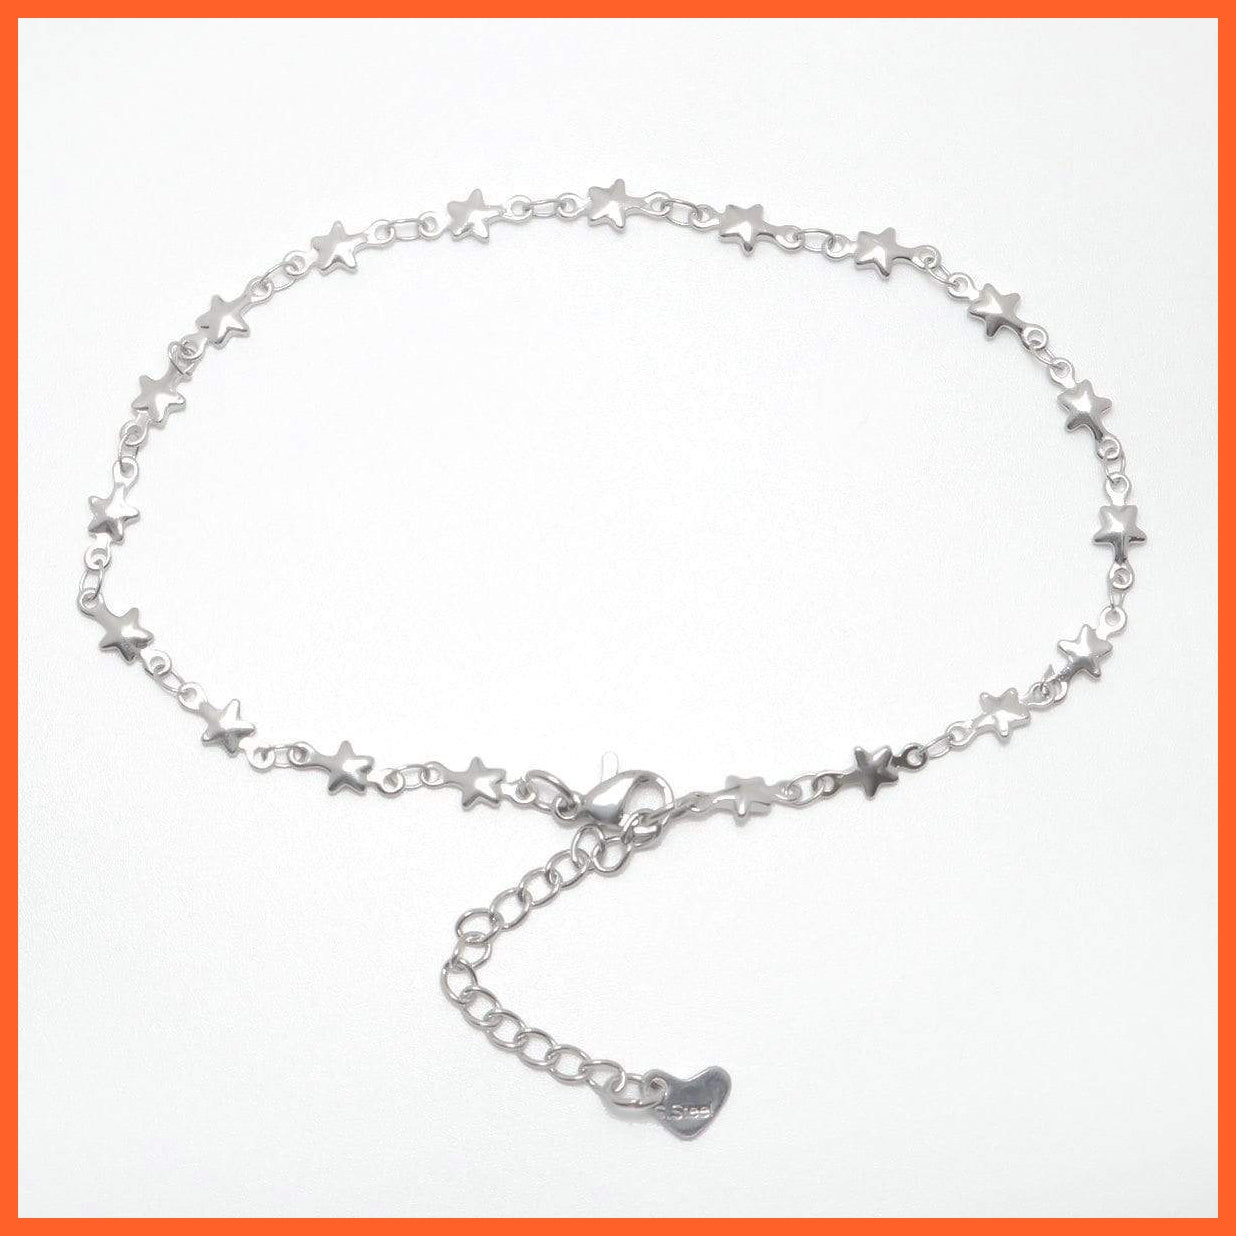 Star Anklet For Women | Summer Beach Jewelry | whatagift.com.au.